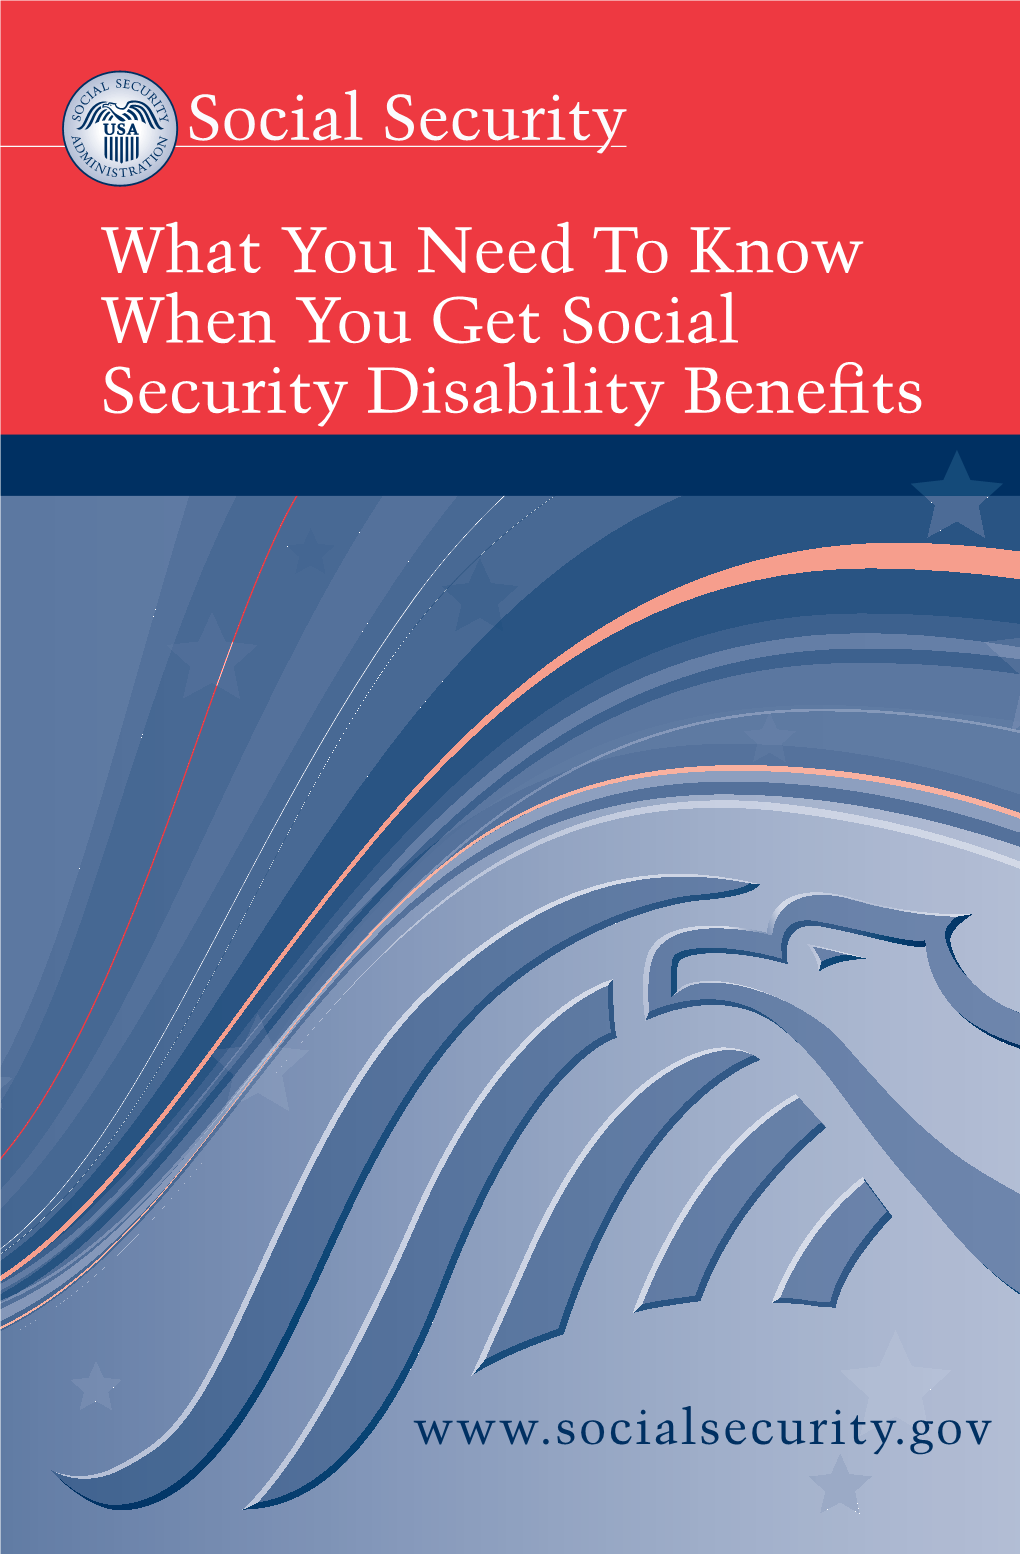 What You Need to Know When You Get Social Security Disability Benefits